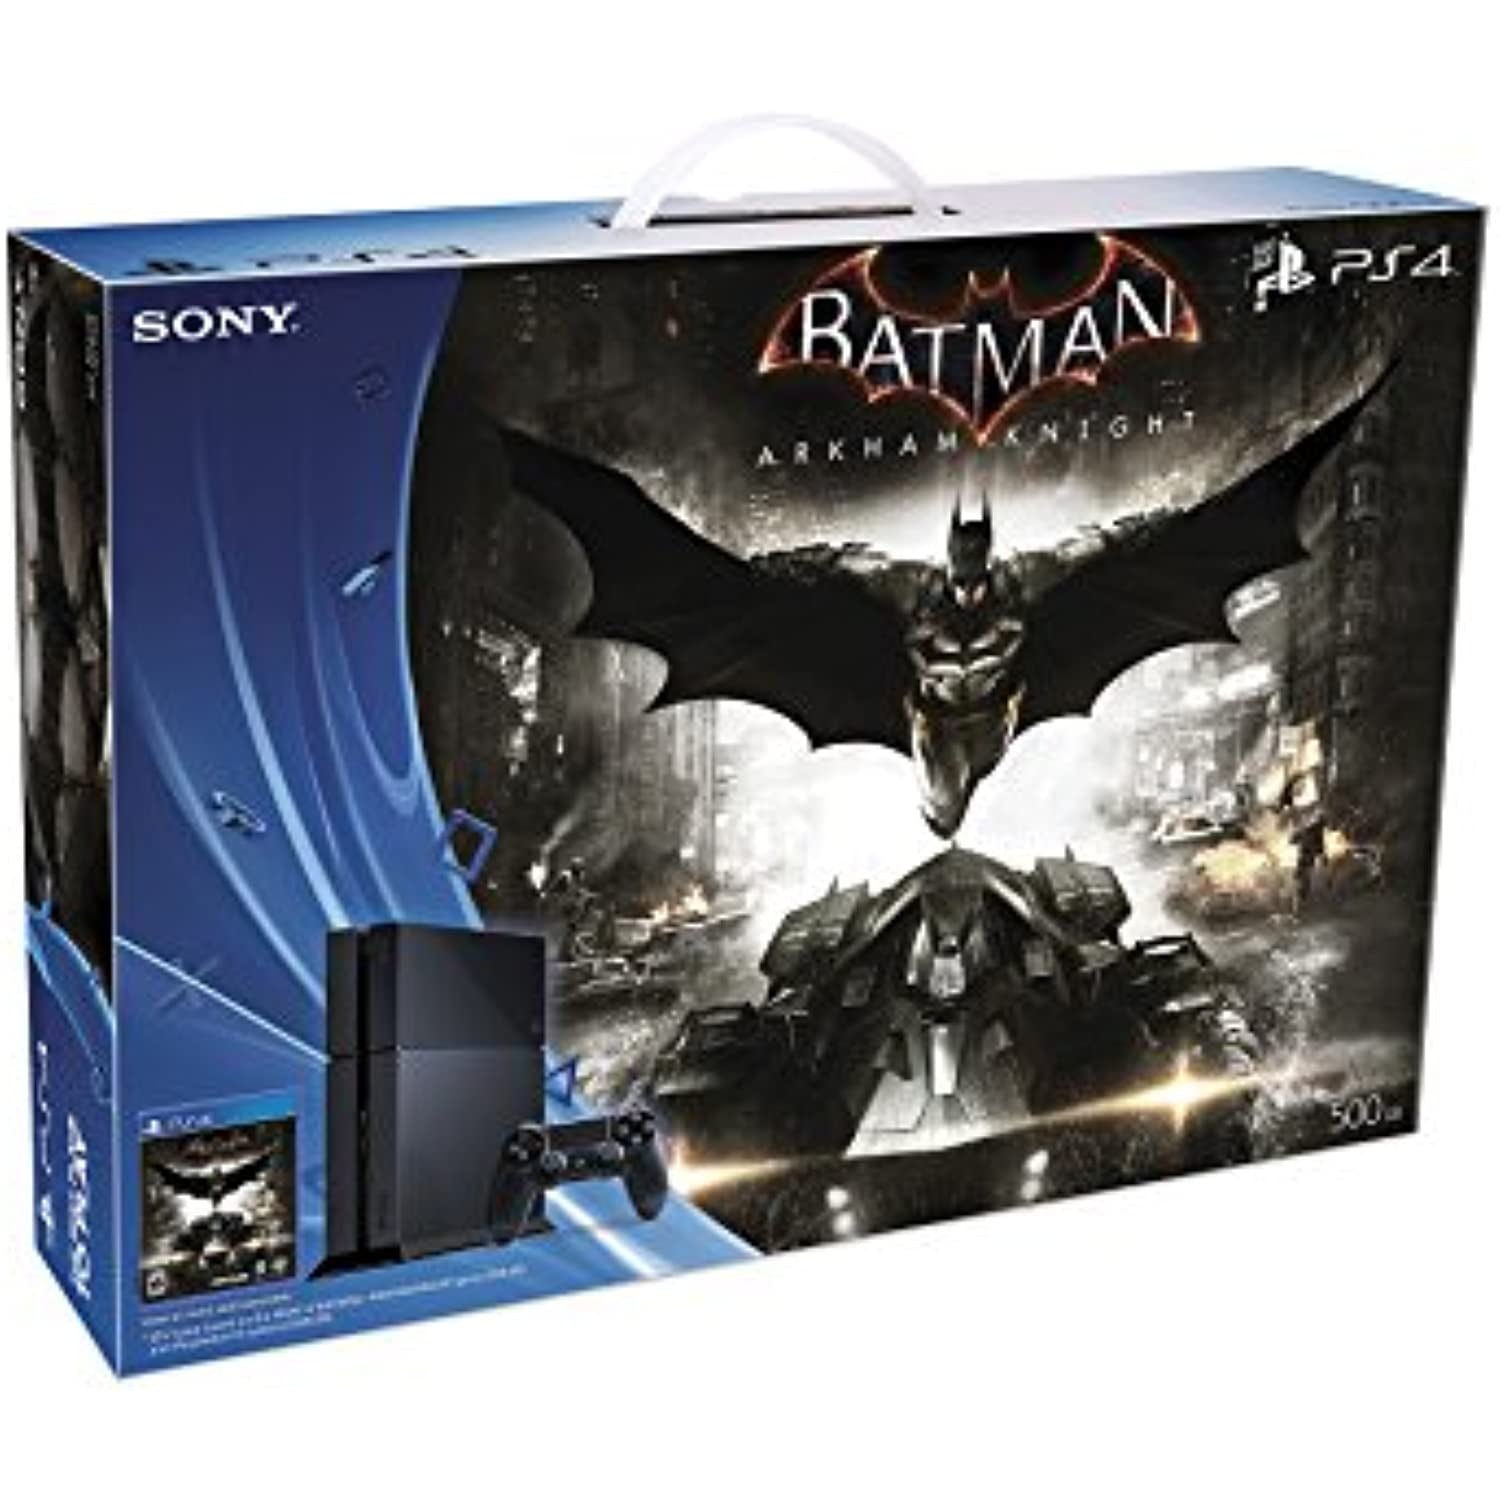 PlayStation gamers rush to buy 'fantastic' £80 Batman game that's appearing  in baskets for £19.99